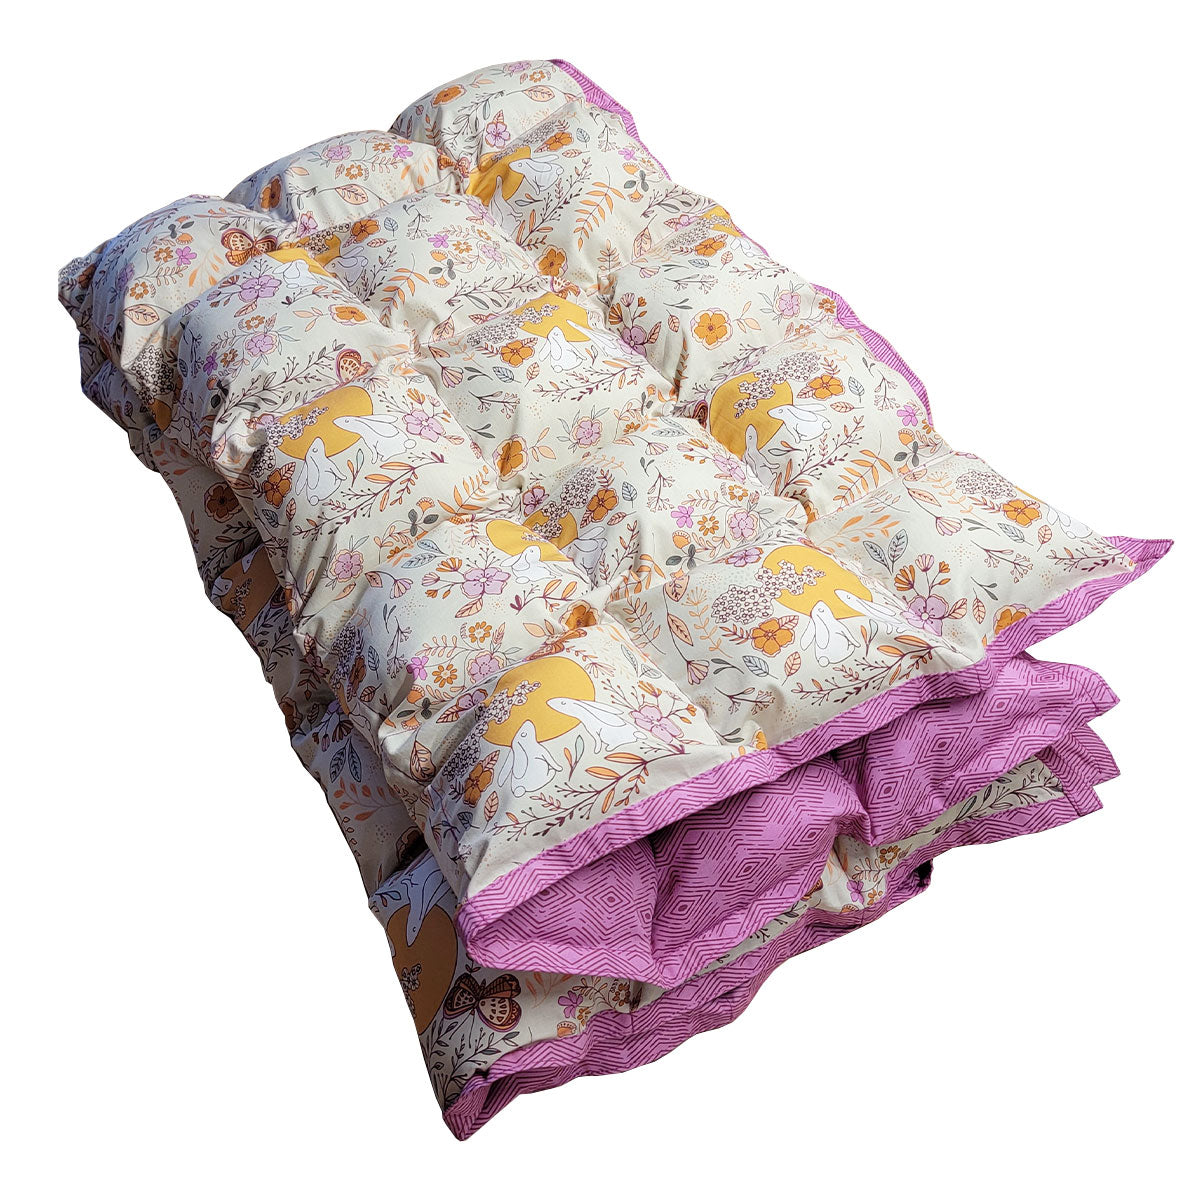 Clearance Weighted Blanket - Medium 14 lb Moon Stories Mauve (for 120 lb user)